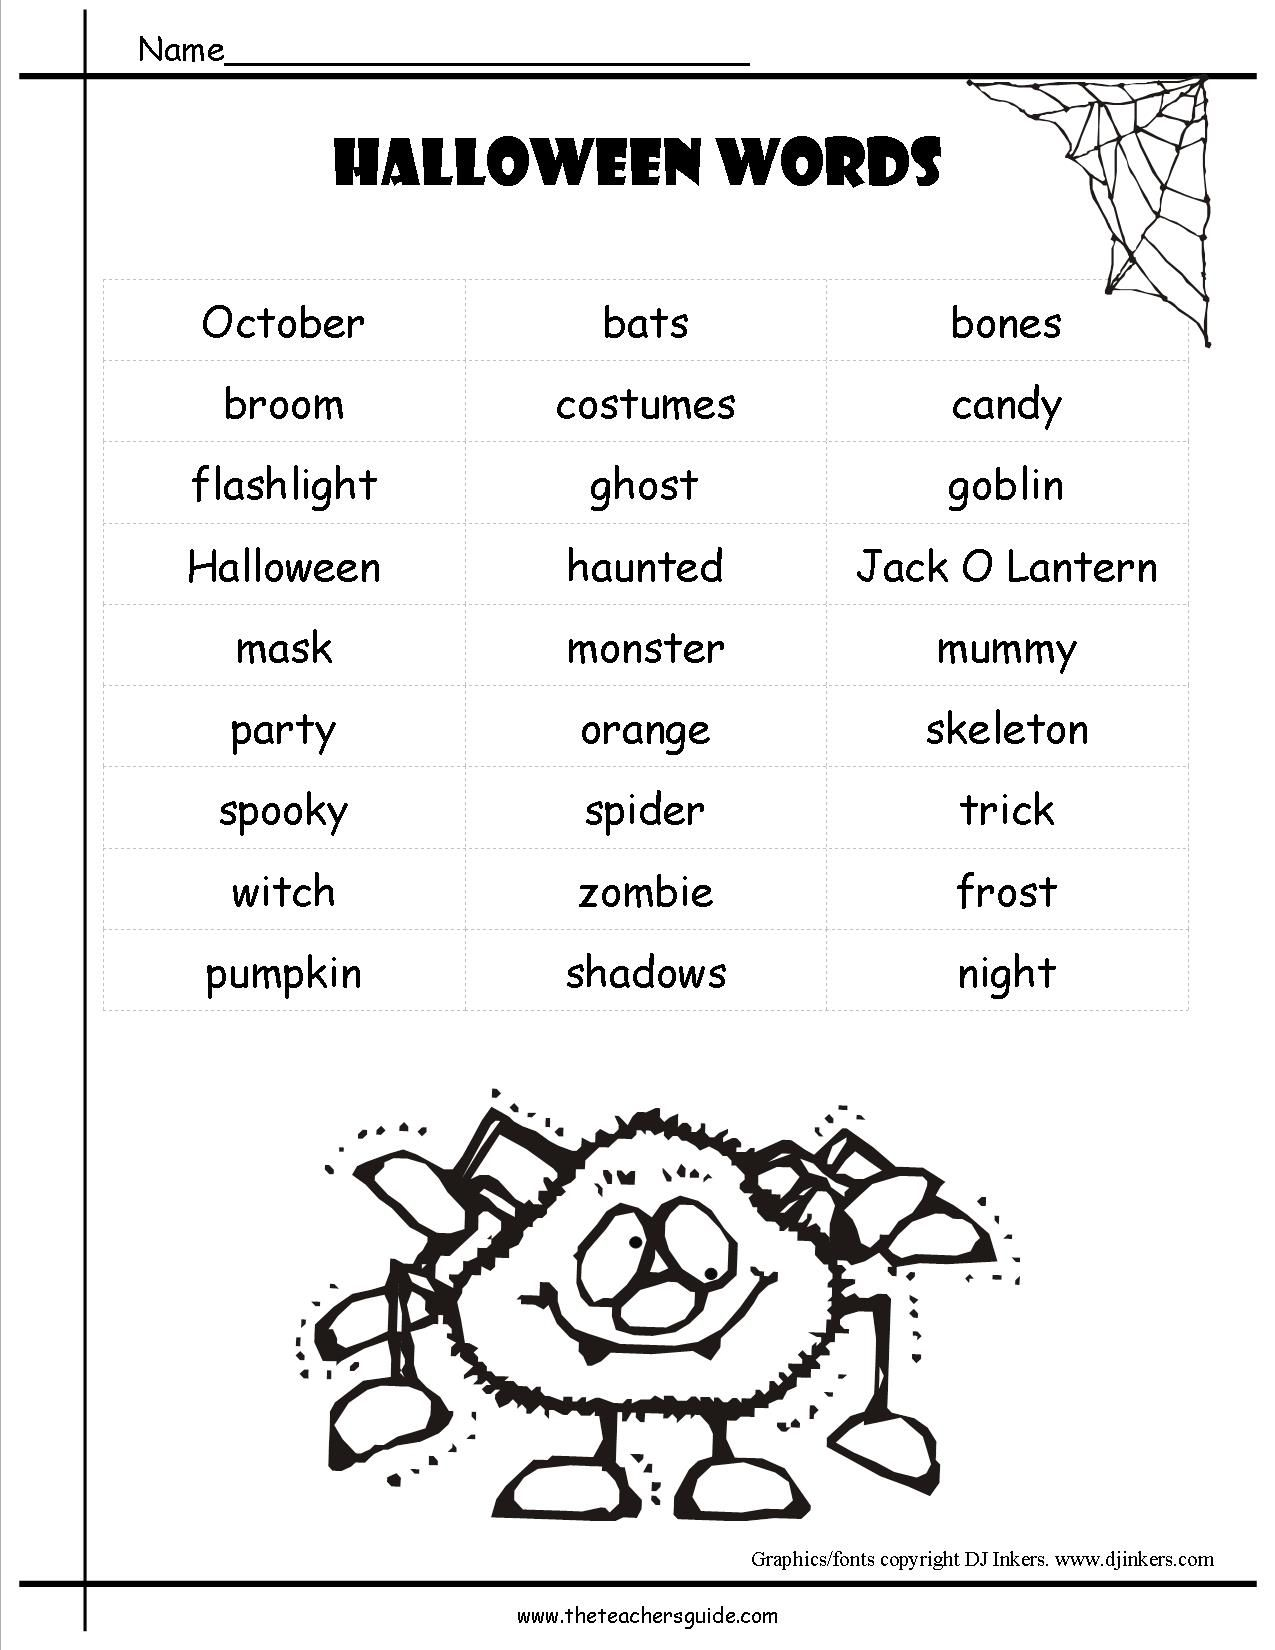 Reading Worksheets: Halloween Printouts From The Guide